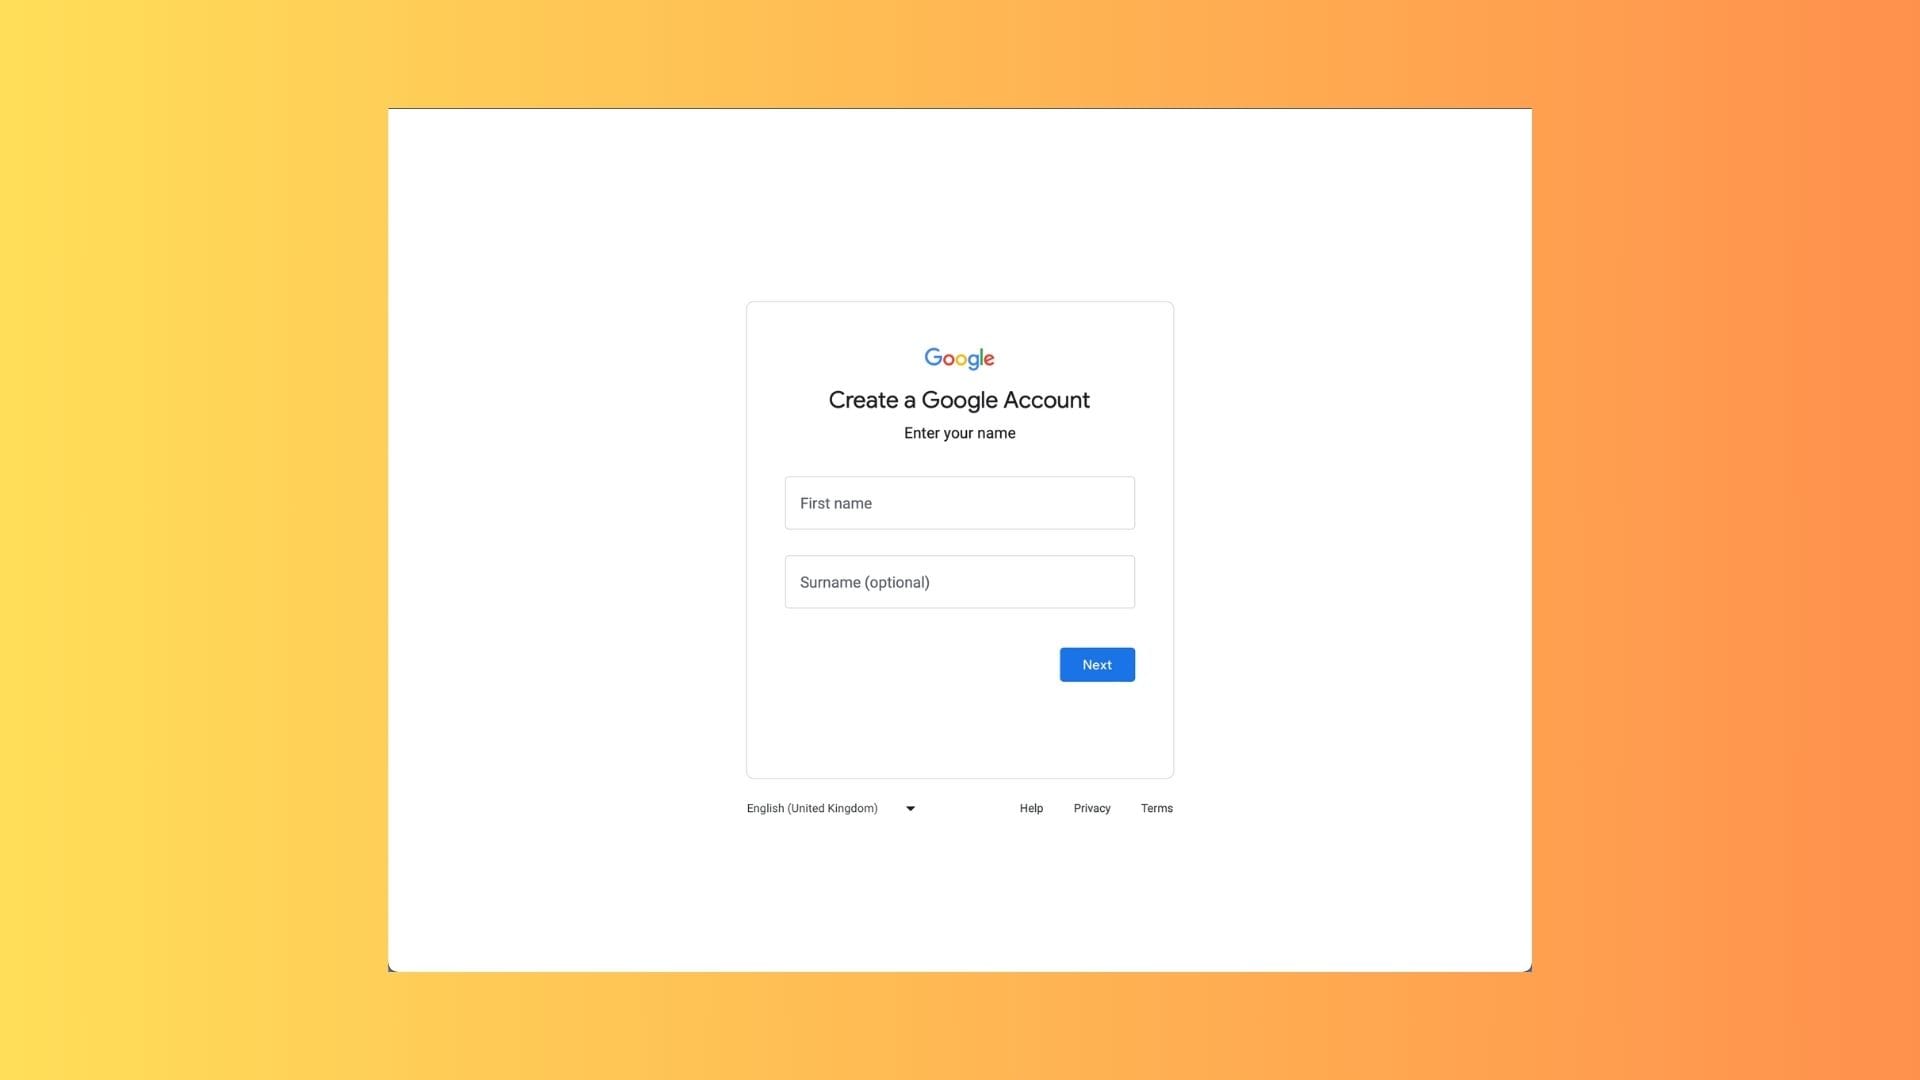 Sign up through special flow: accounts.google.com/SignUpWithoutGmail